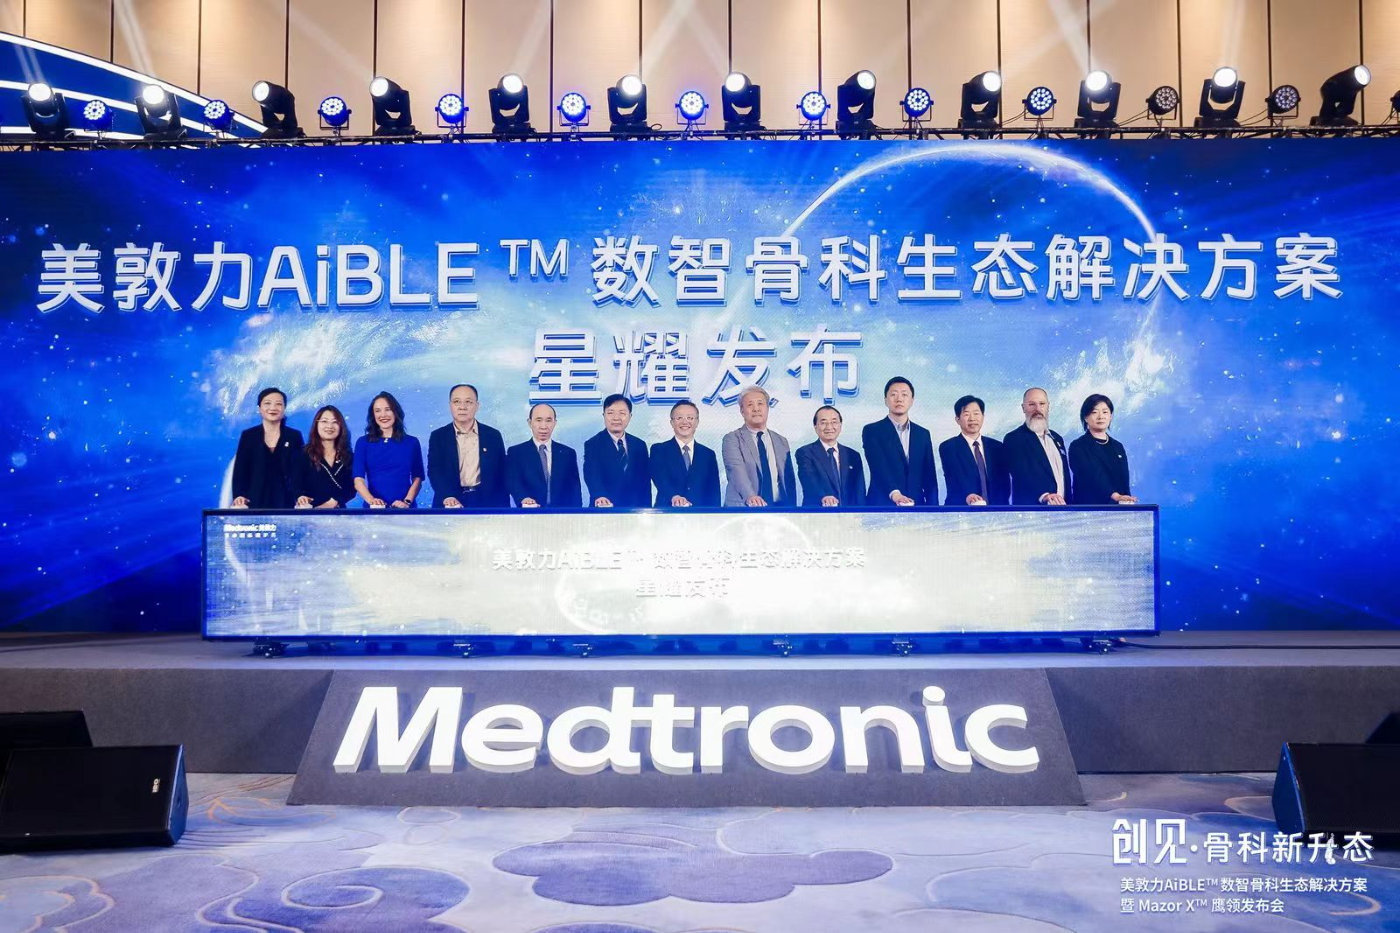  Innovative Digital Orthopaedics, Medtronic Mazor X ™ Yingling spine surgery robot integration platform is listed in China